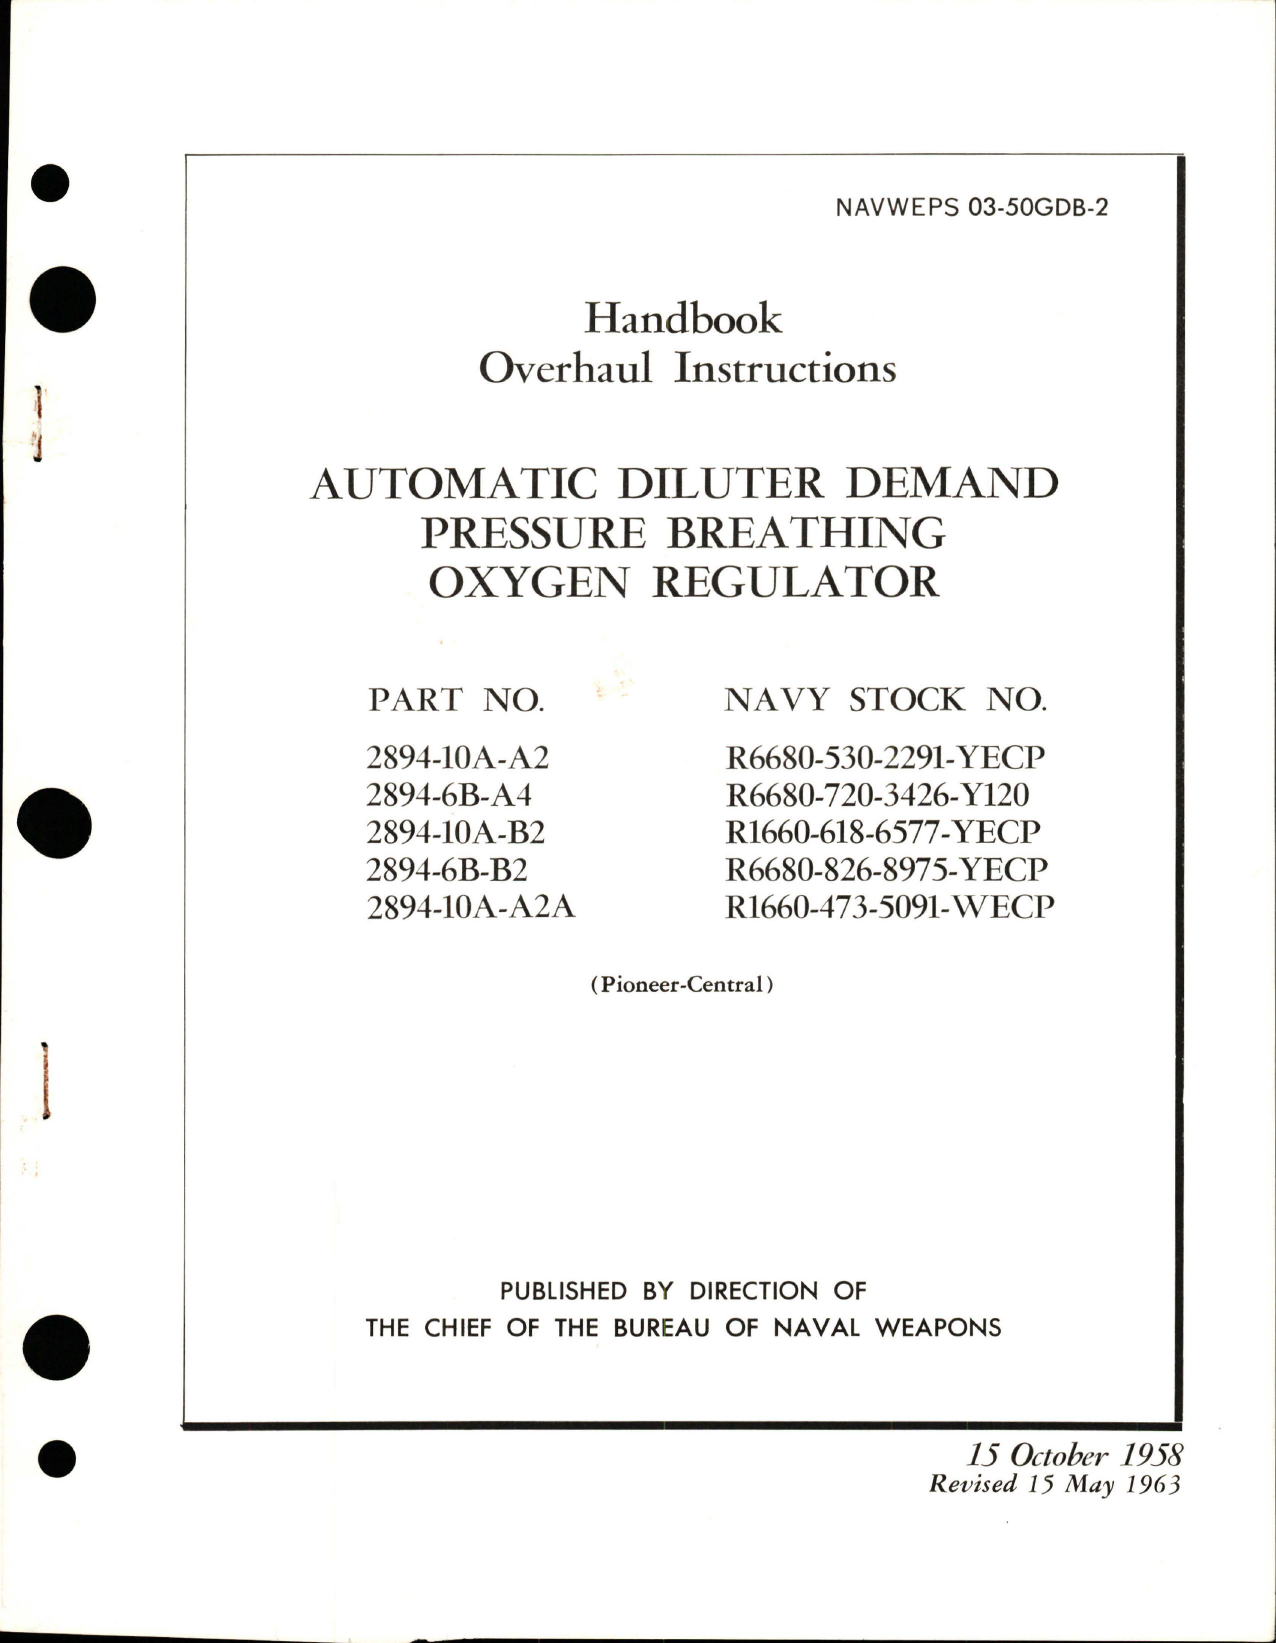 Sample page 1 from AirCorps Library document: Overhaul Instructions for Automatic Diluter Demand Pressure Breathing Oxygen Regulator - Parts 2894-10A-A2, 2894-6B-A4, 2894-10A-B2, 2894-6B-B2, and 2894-10A-A2A